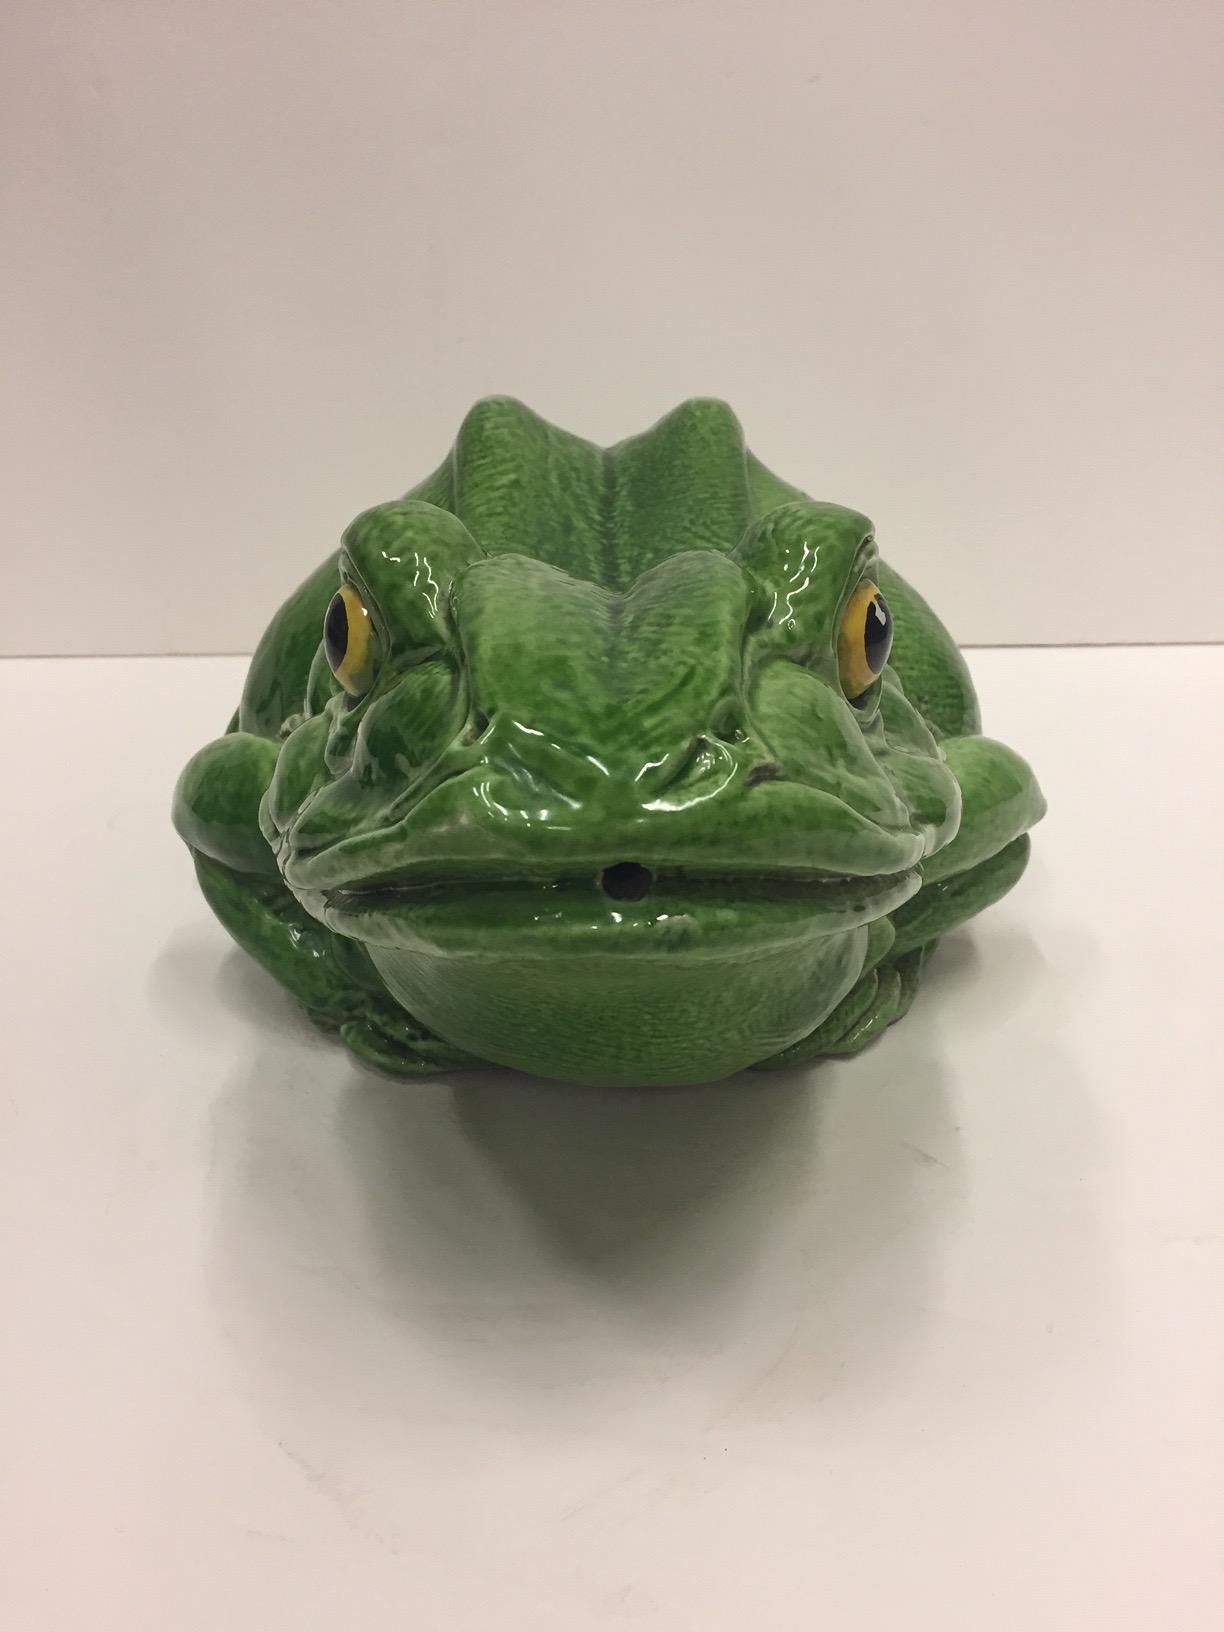 An eye catching table top frog accessory in a lovely shade of green glazed terracotta, having yellow rimmed black eyes and Made in Italy on the bottom.